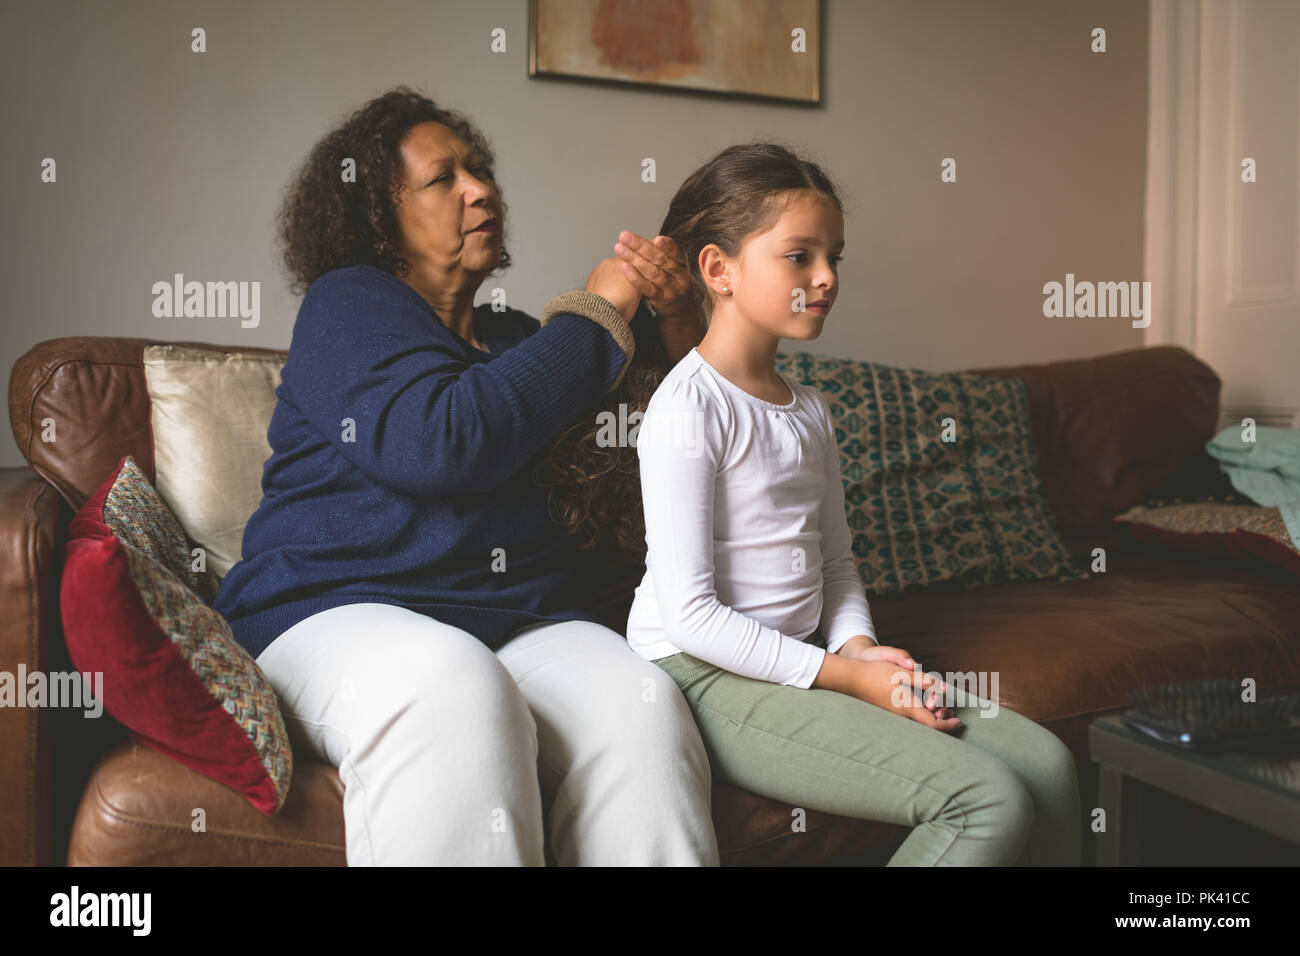 Grandmother is making hairstyle of granddaughter Stock Photo